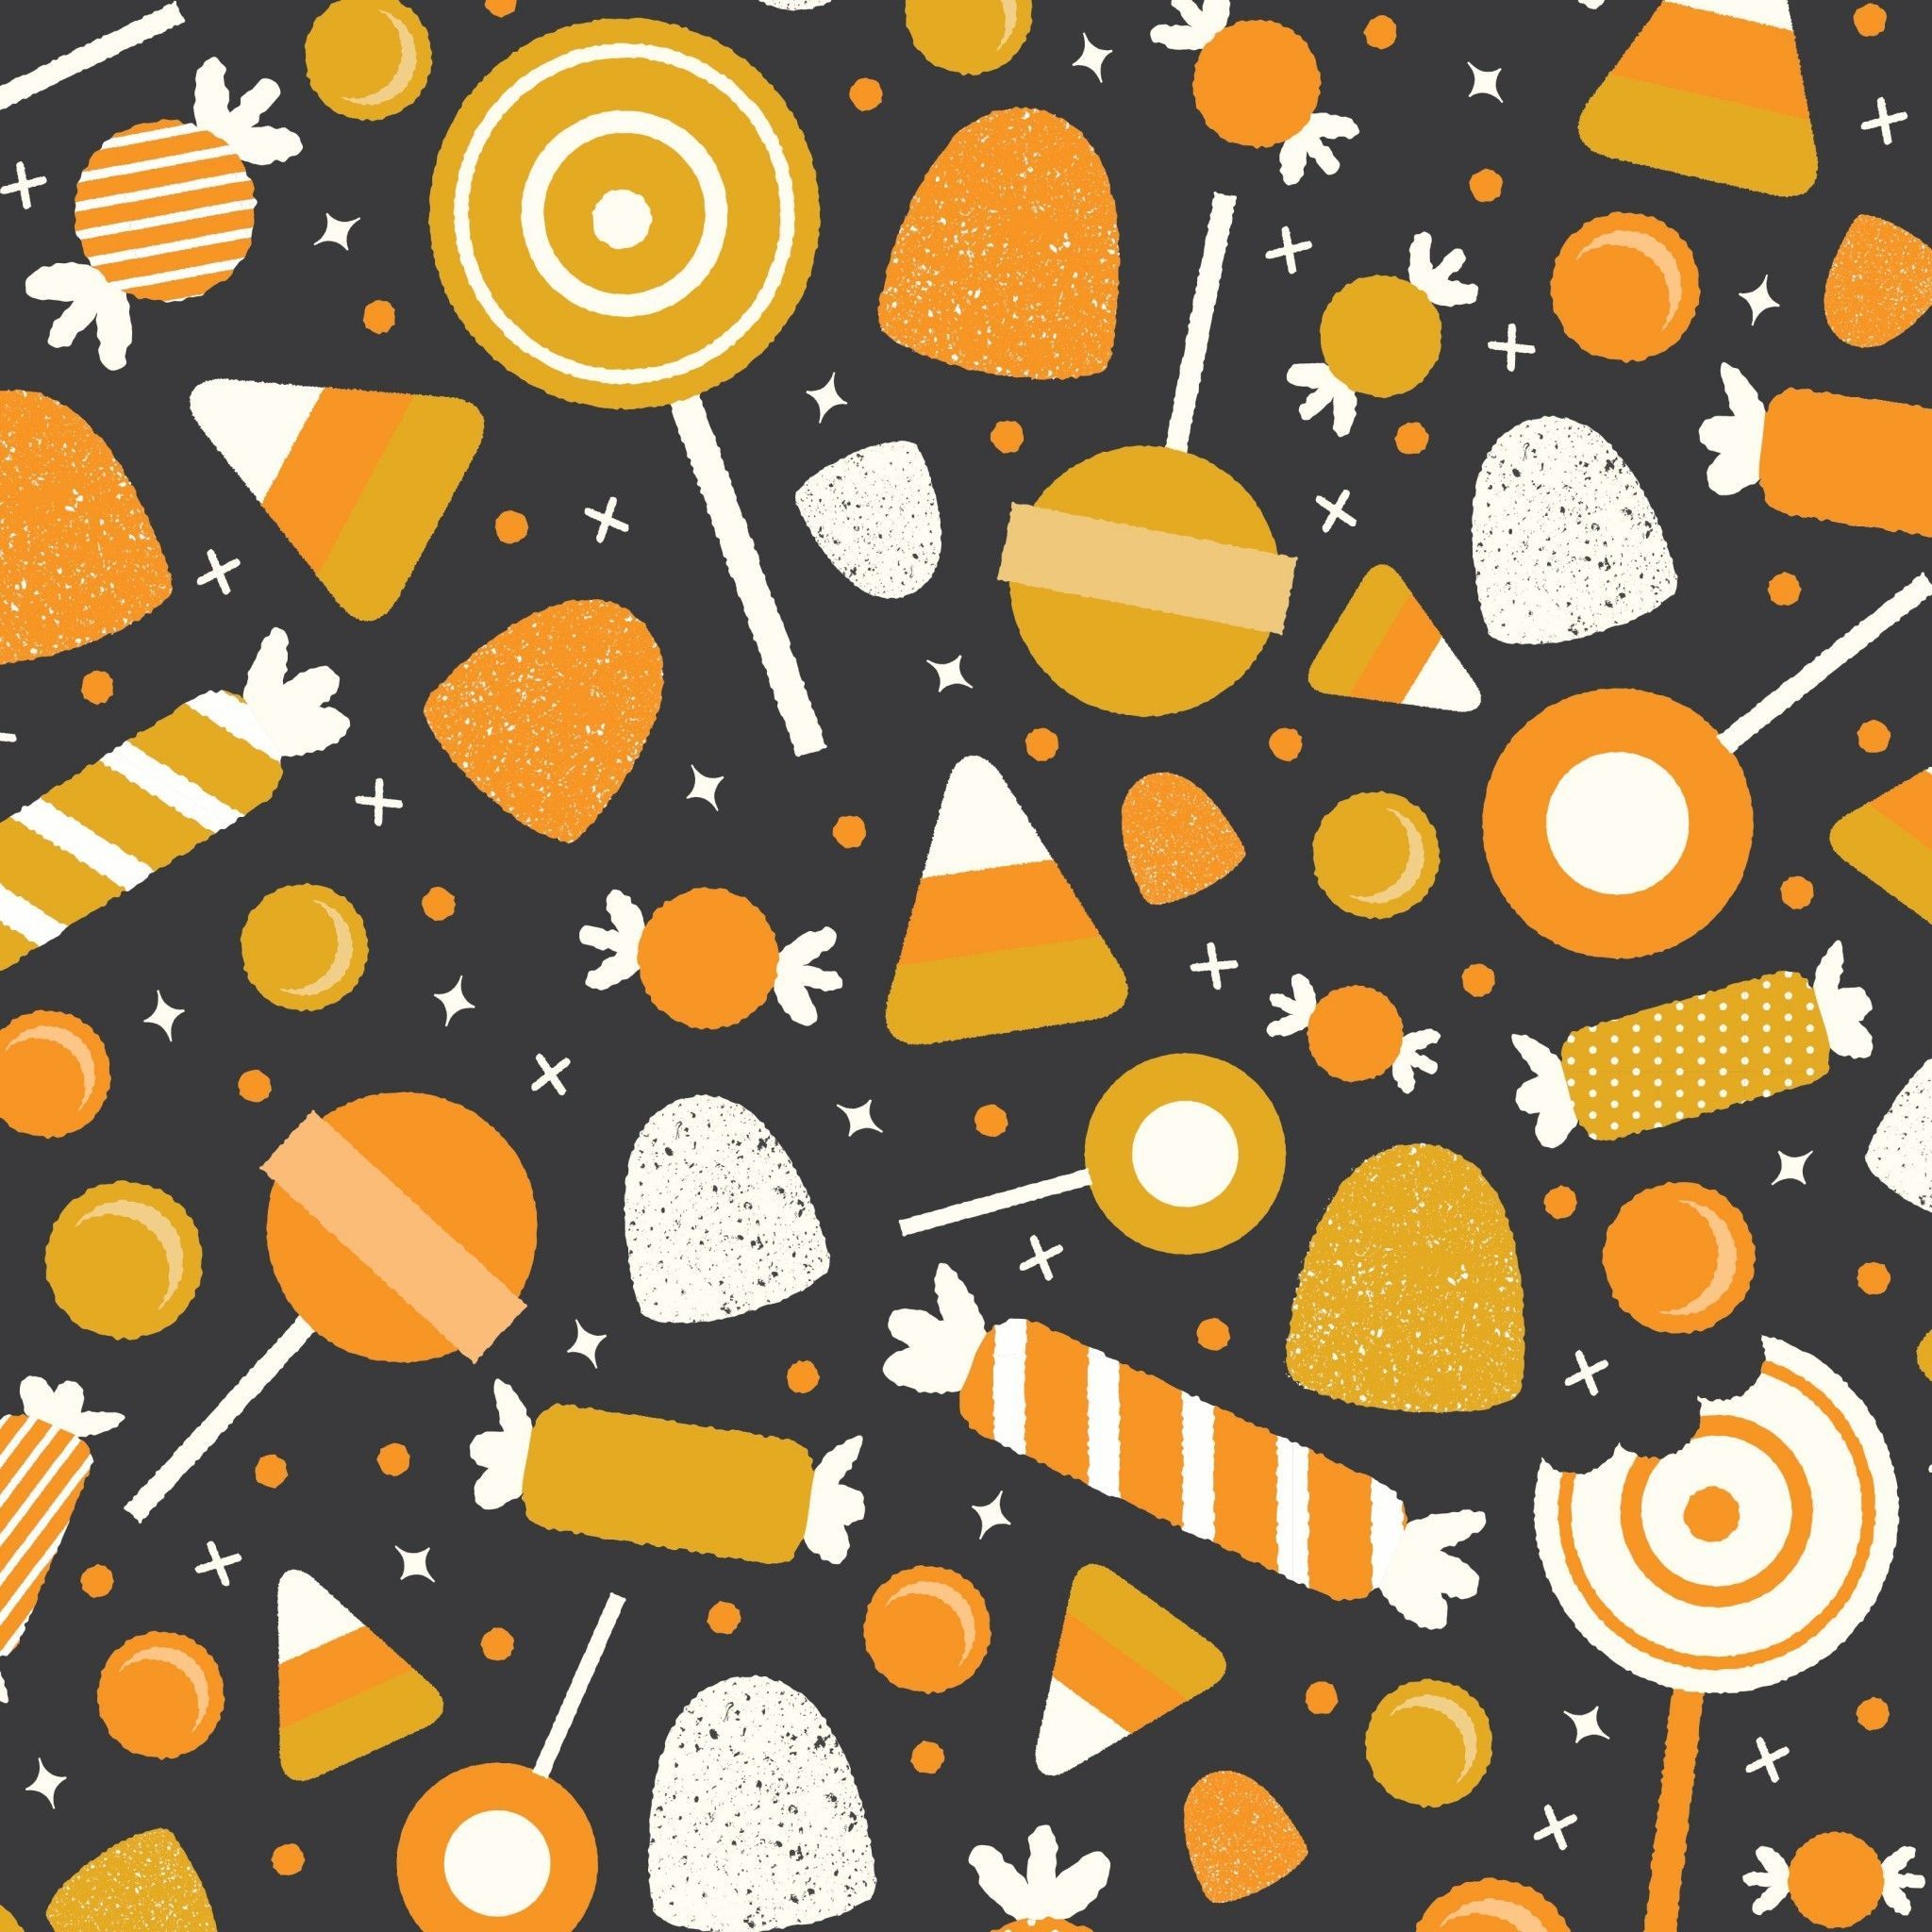 Halloween candy. Tap image for more fun pattern wallpaper for iPhone, iPad & And. Halloween patterns, Halloween wallpaper, Halloween desktop wallpaper